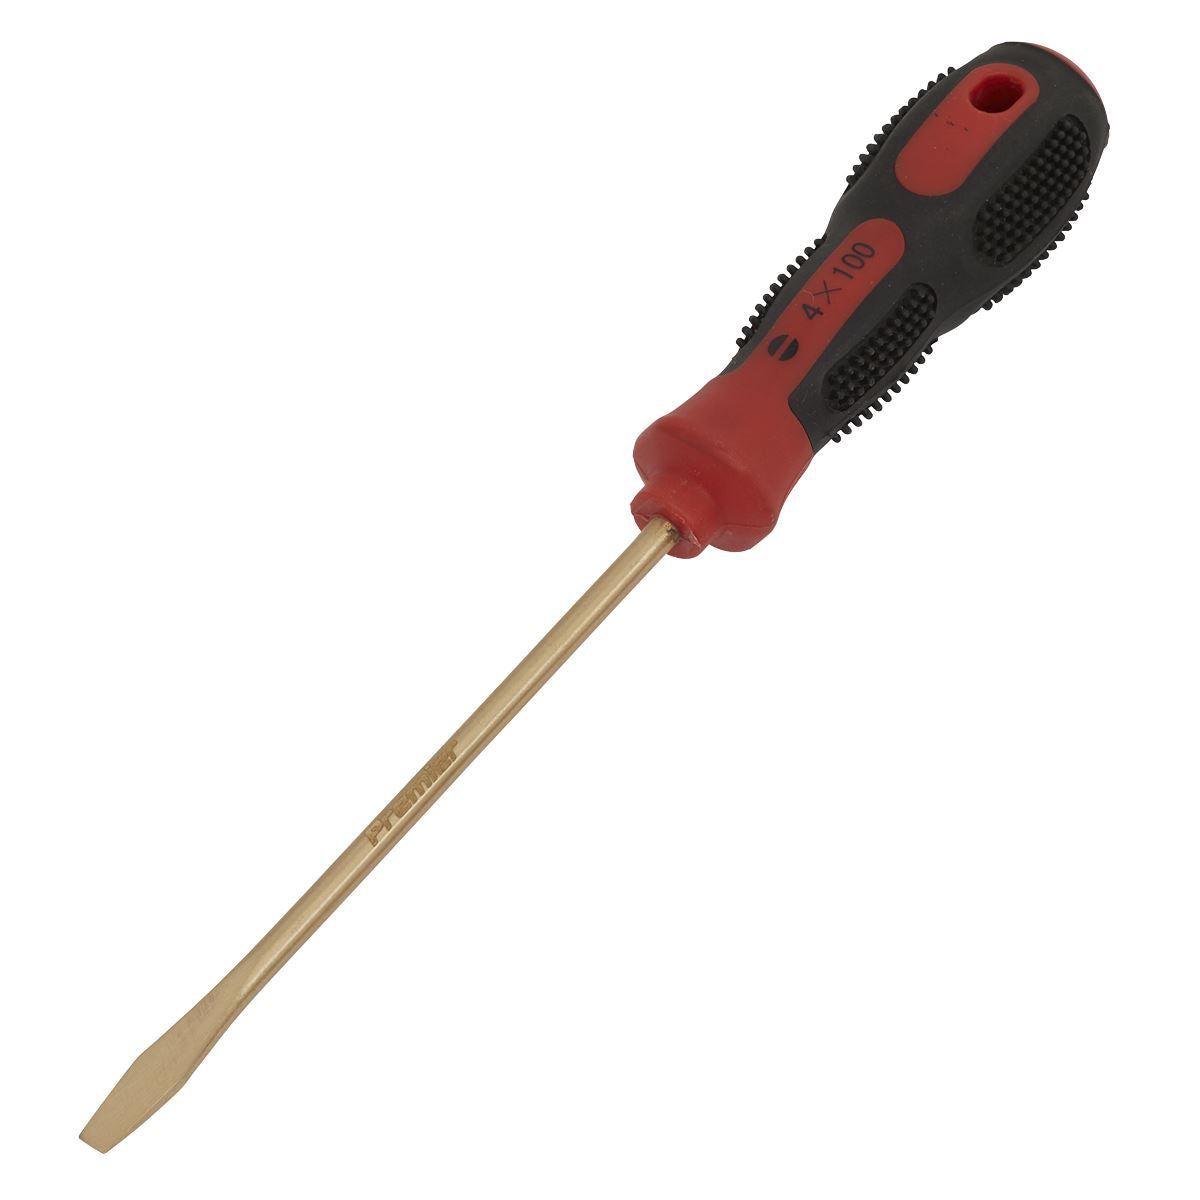 Sealey Premier Screwdriver Slotted 4 x 100mm - Non-Sparking